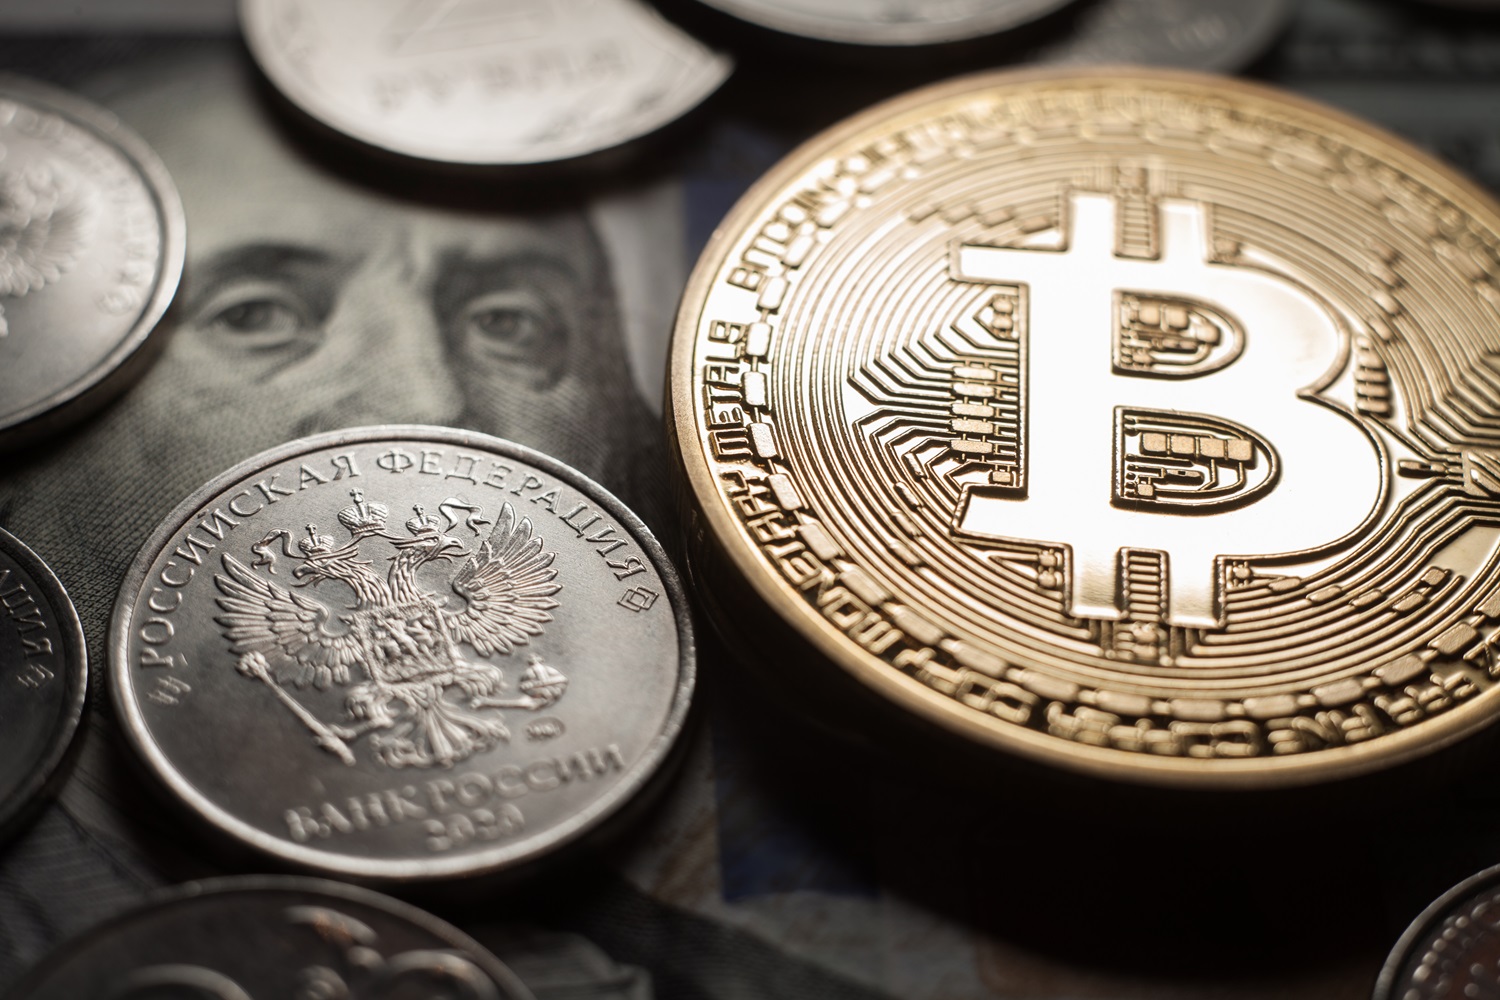 A metal coin intended to represent Bitcoin, next to Russian ruble coins and US dollar banknotes.